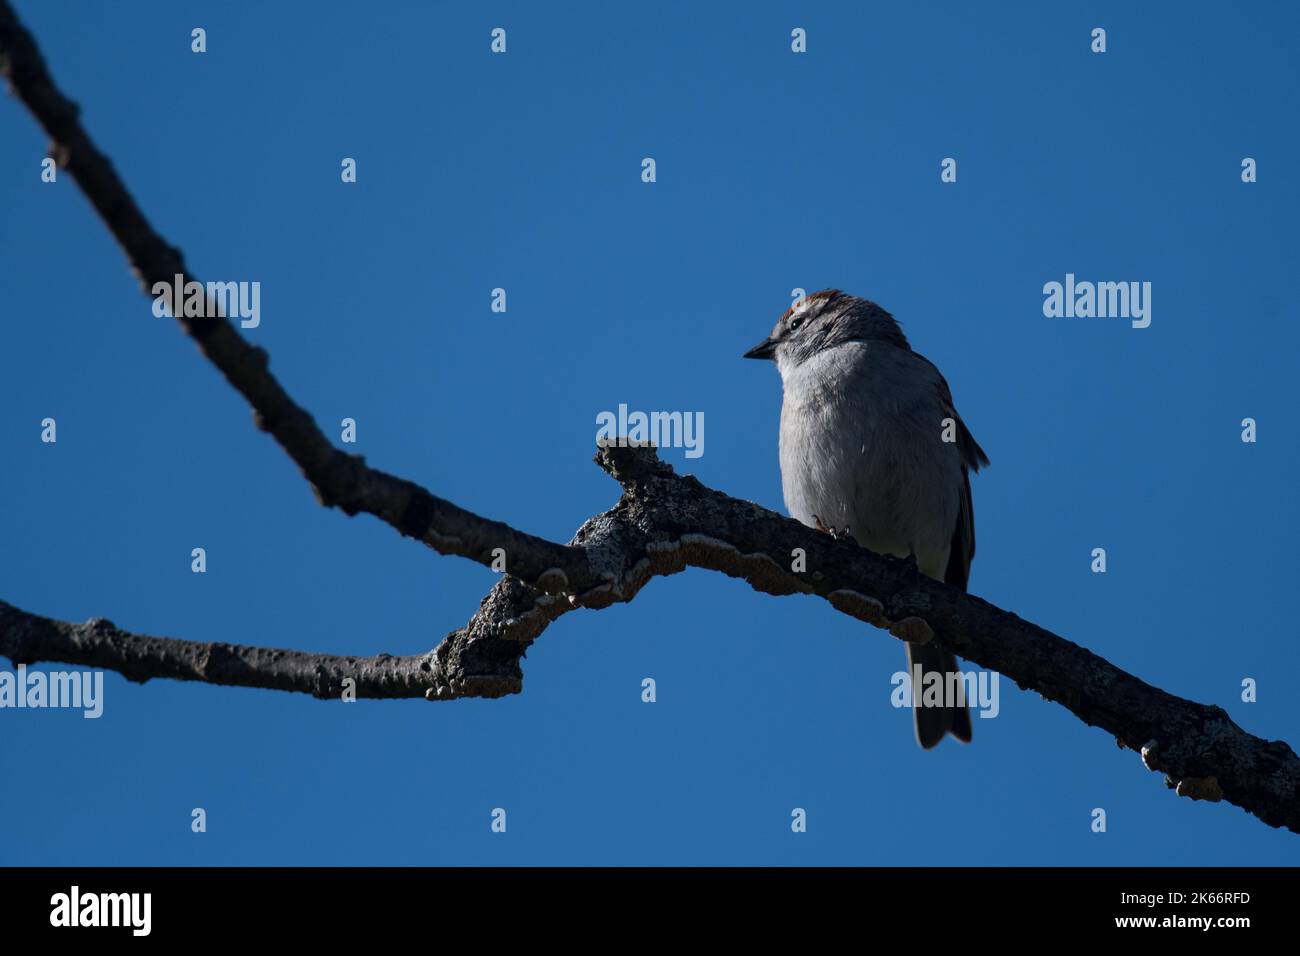 Chipping Sparrow perched on a branch with blue sky background Stock Photo